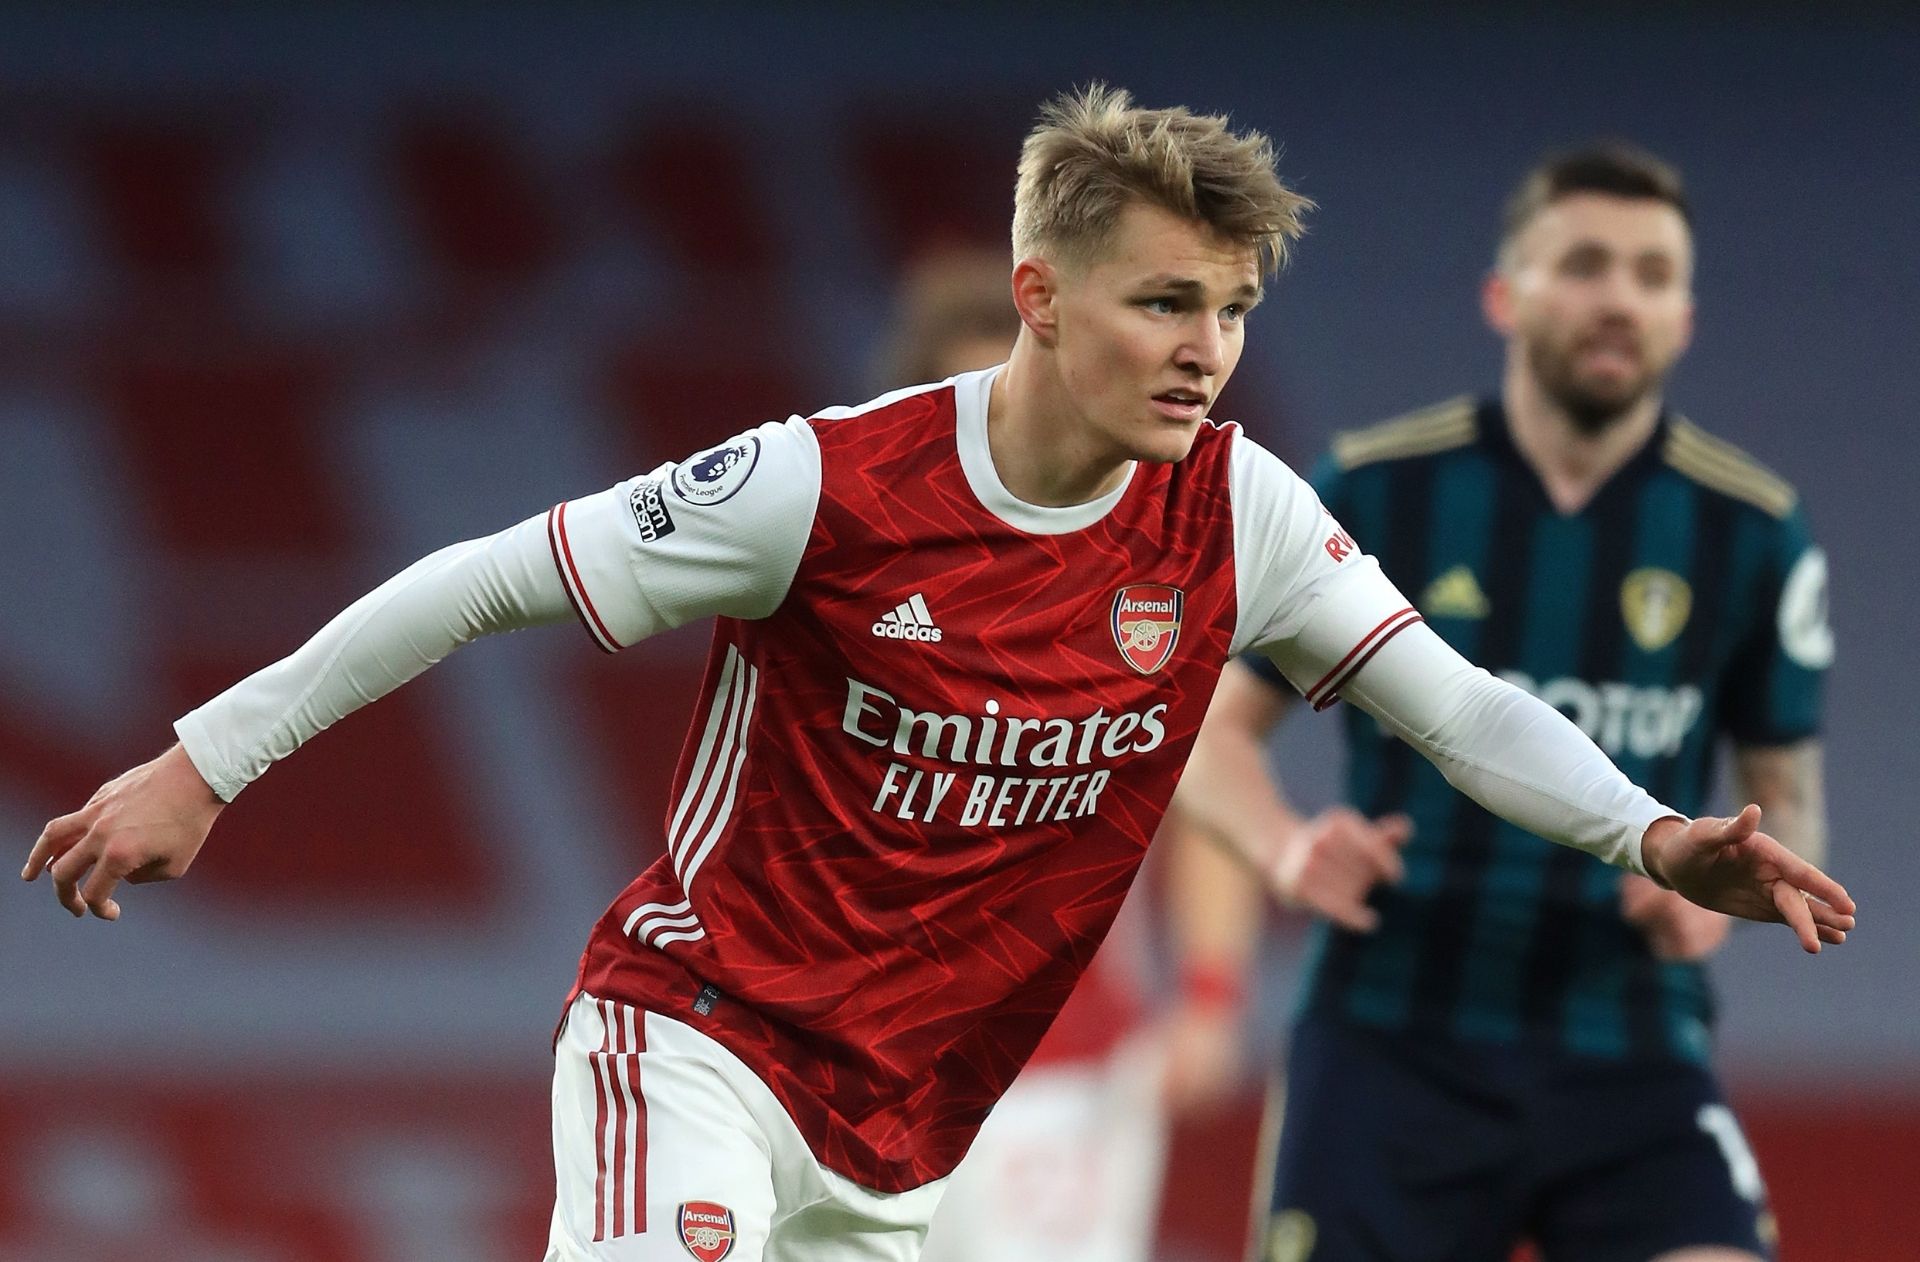          Arsenal's young midfielder welcomes captaincy prospects with gladness